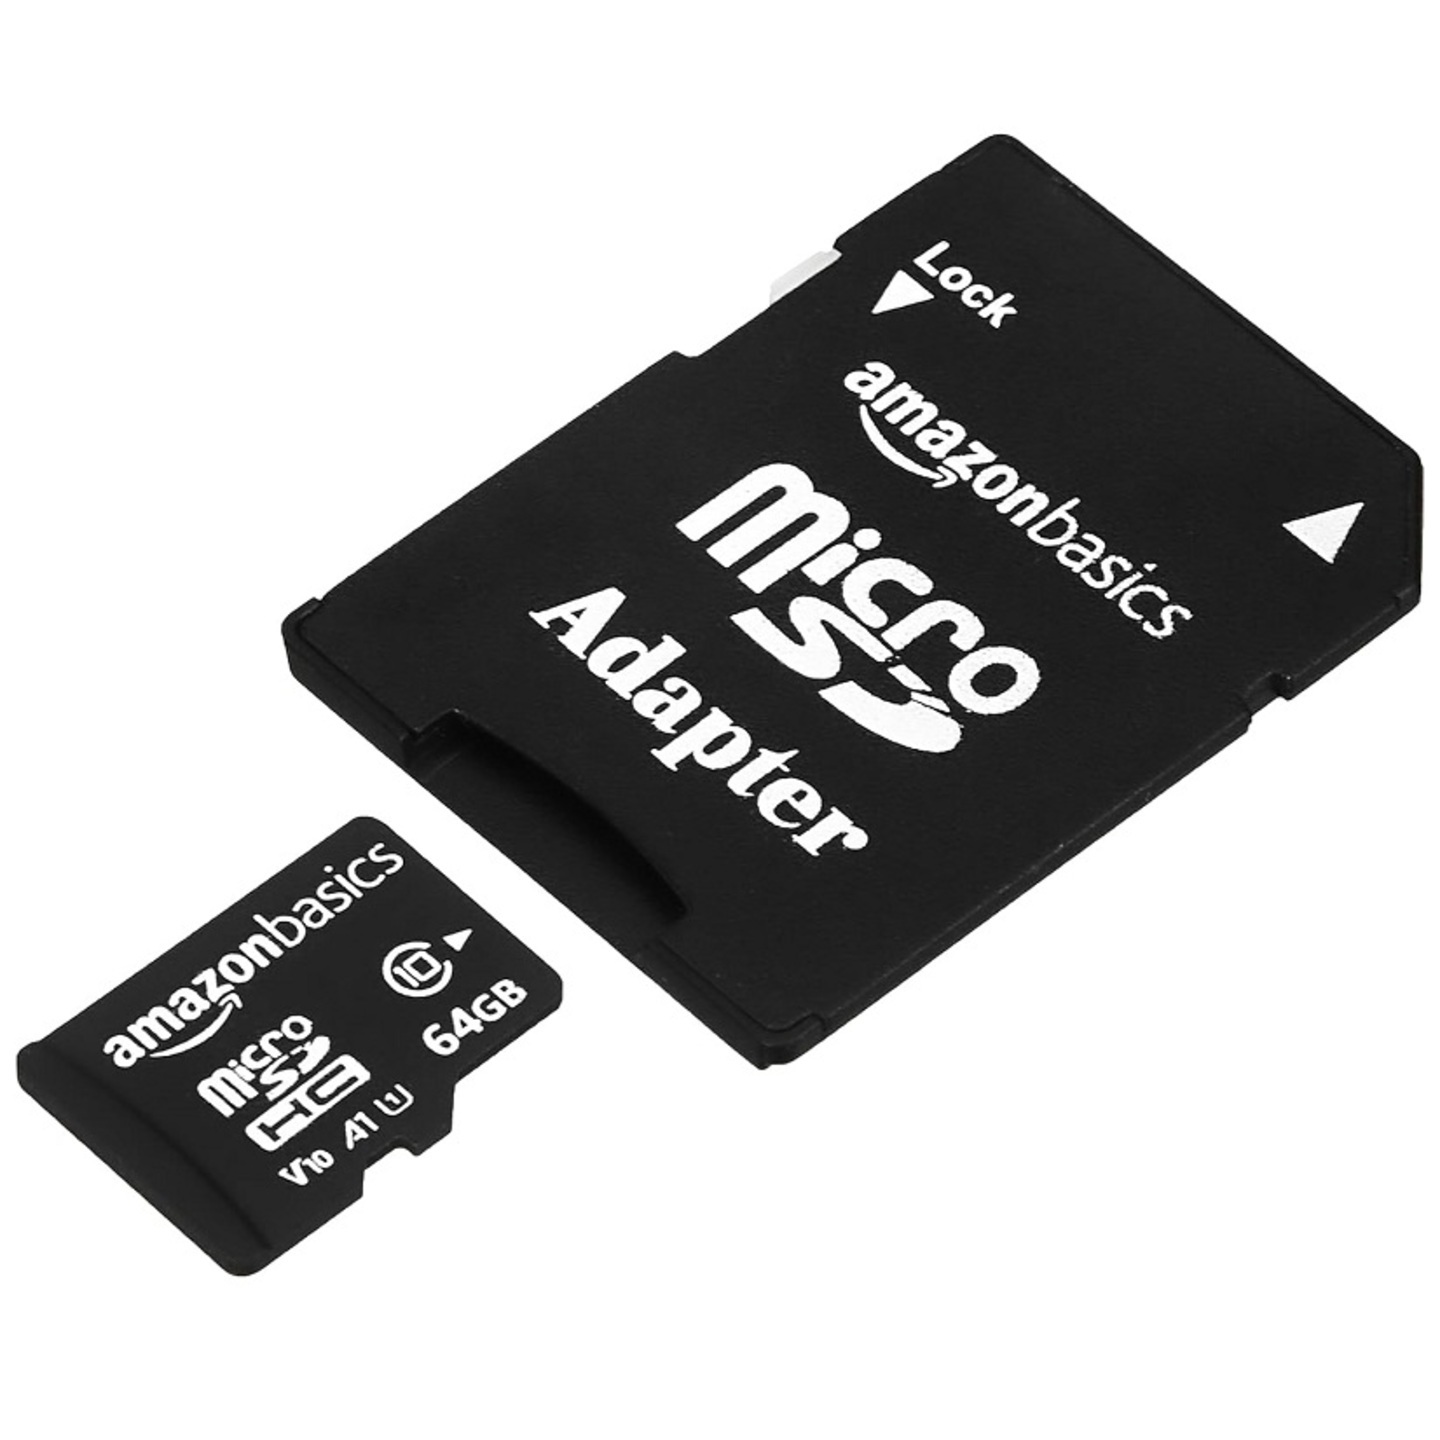  64 GB Micro SD Card with Adapter ( Up to 120 MB/s, Class 10 | U1, C10, & V10 Speed Classes)